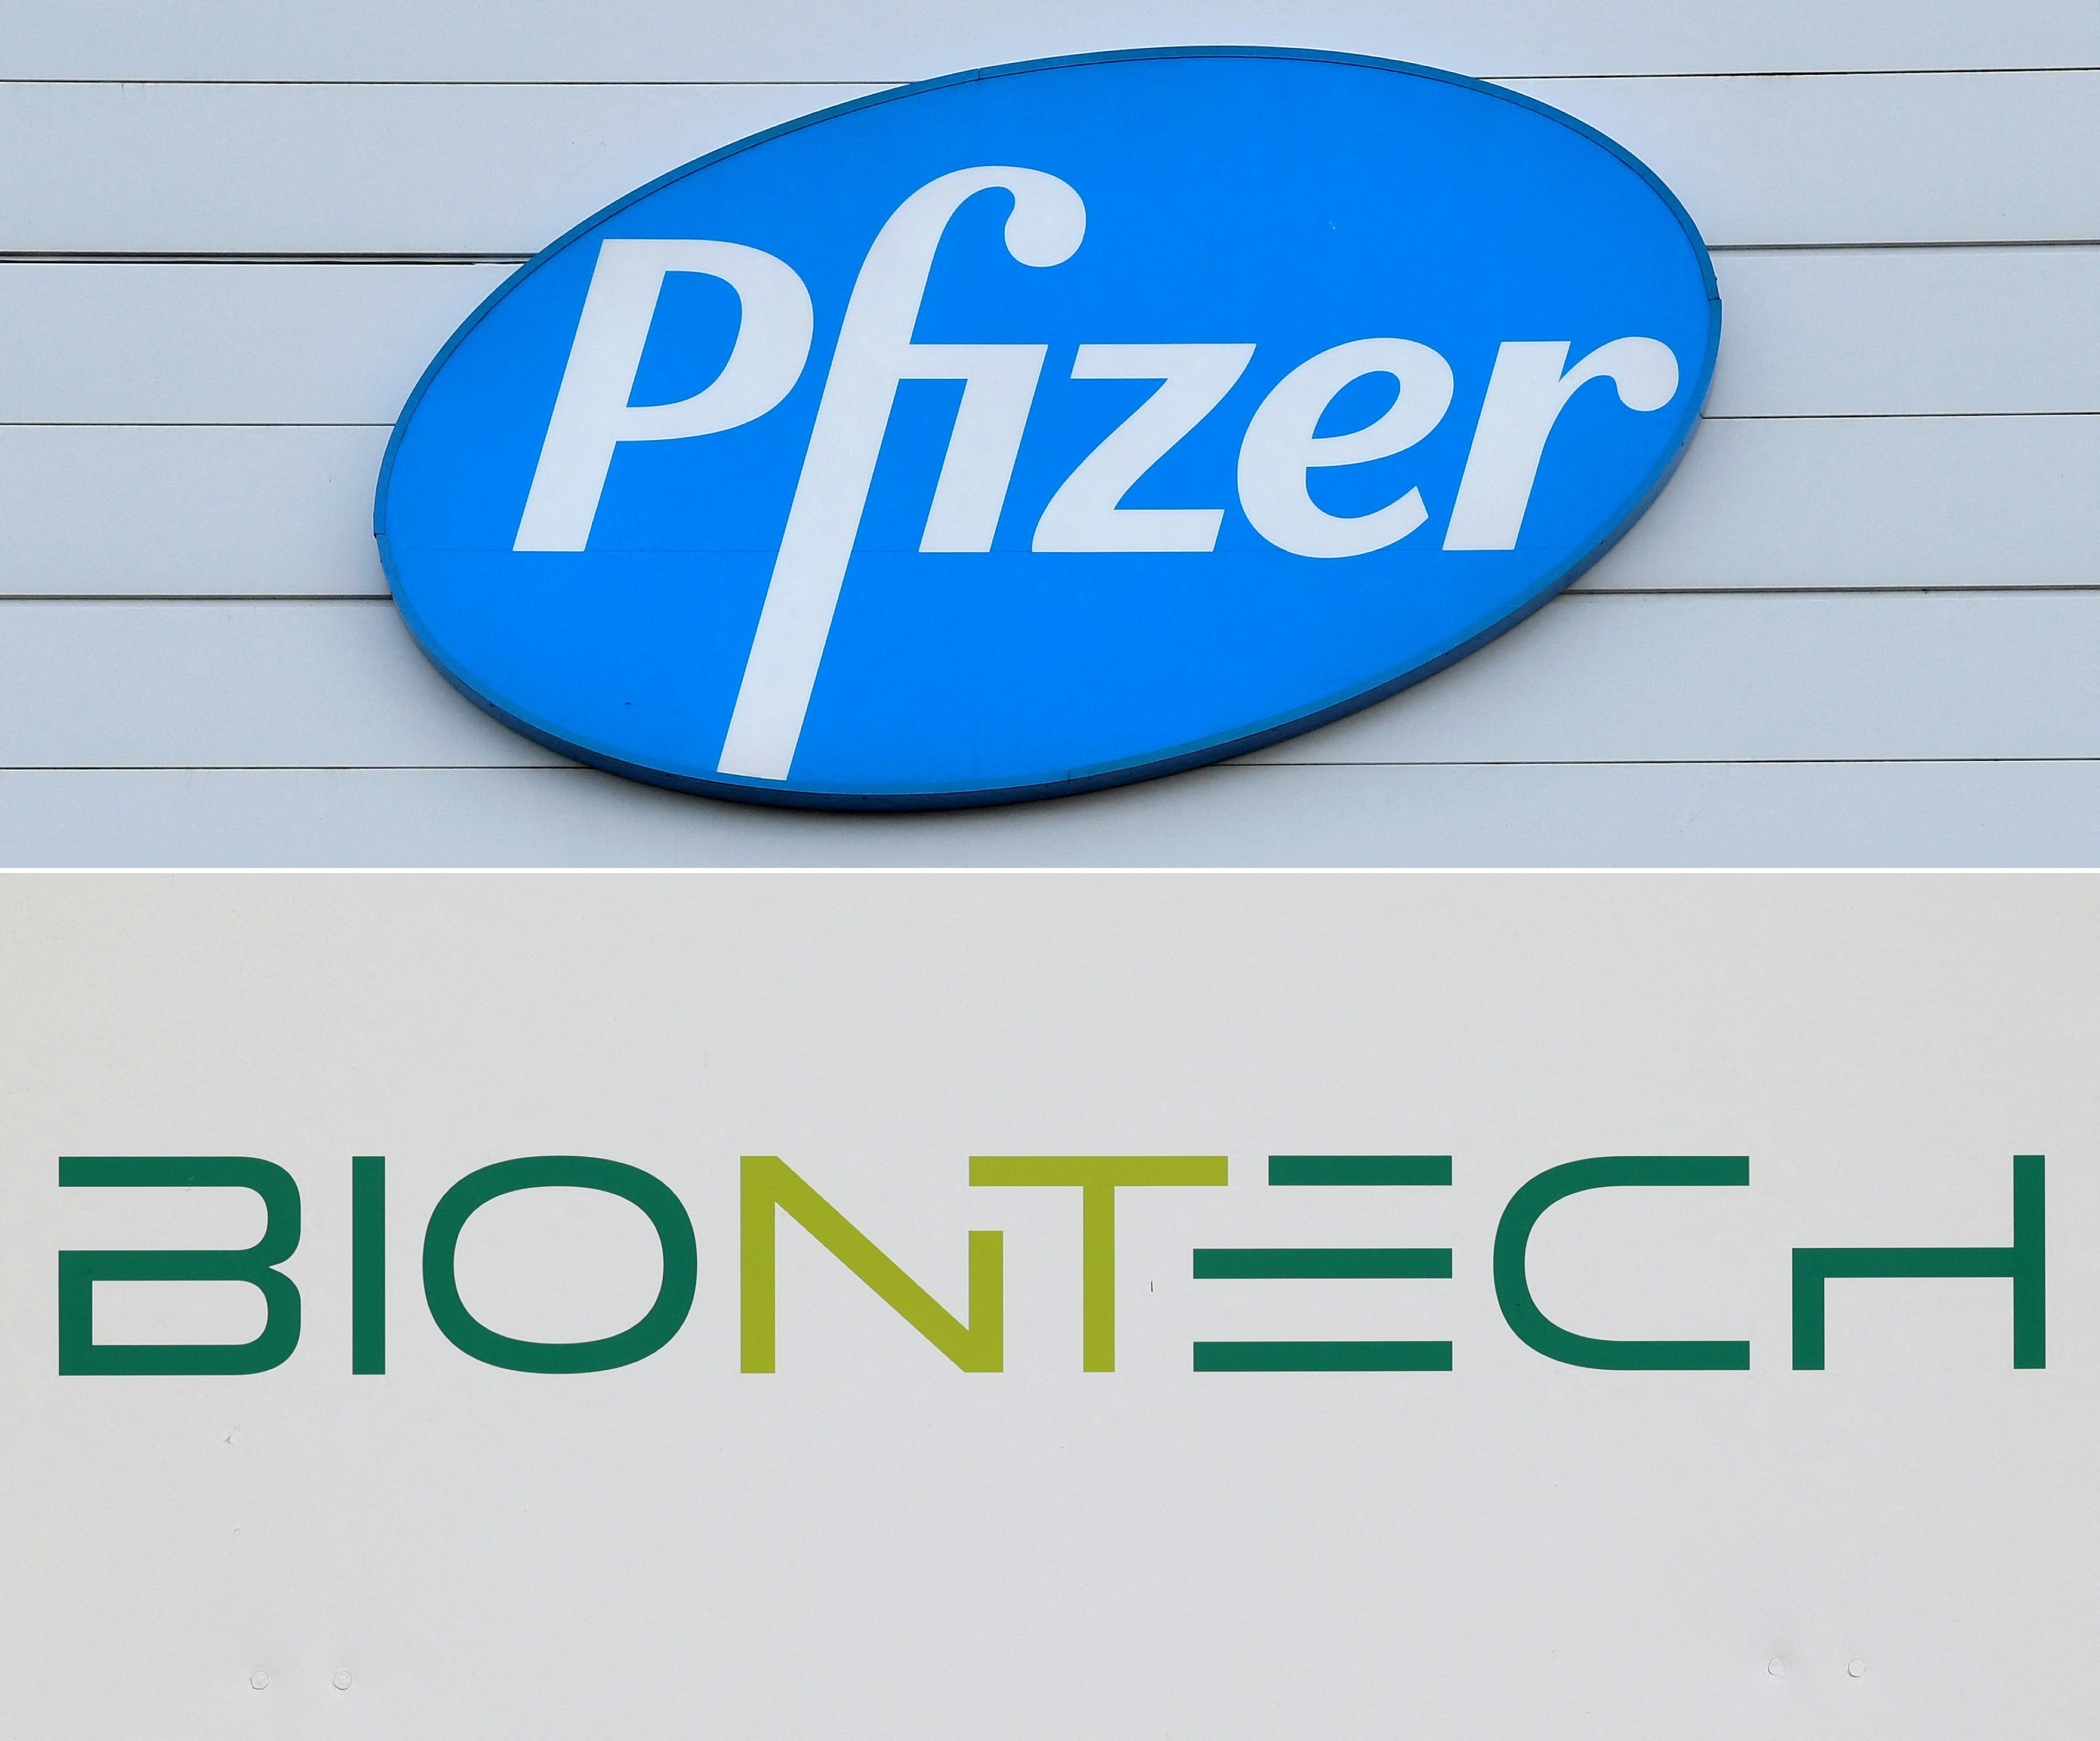 (FILES) This file photograph created on April 30, 2021, shows a combination of file photographs with the logo of US multinational pharmaceutical company Pfizer (top) at the production site of the Covid-19 vaccine in Puurs, Belgium, on December 22, 2020, and a logo of BioNTech (bottom) at the headquarters of the biopharmaceutical company in Mainz, western Germany. - Pfizer and BioNTech have begun enrollment for a clinical trial to test the safety and immune response of their Omicron-specific Covid-19 vaccine in adults aged up to 55, the companies said in a statement January 25, 2022.  Pfizer's CEO Albert Bourla previously said at a conference that the pharmaceutical giant could be ready to file for regulatory approval of the shot by March. (Photo by JOHN THYS and Yann Schreiber / AFP)